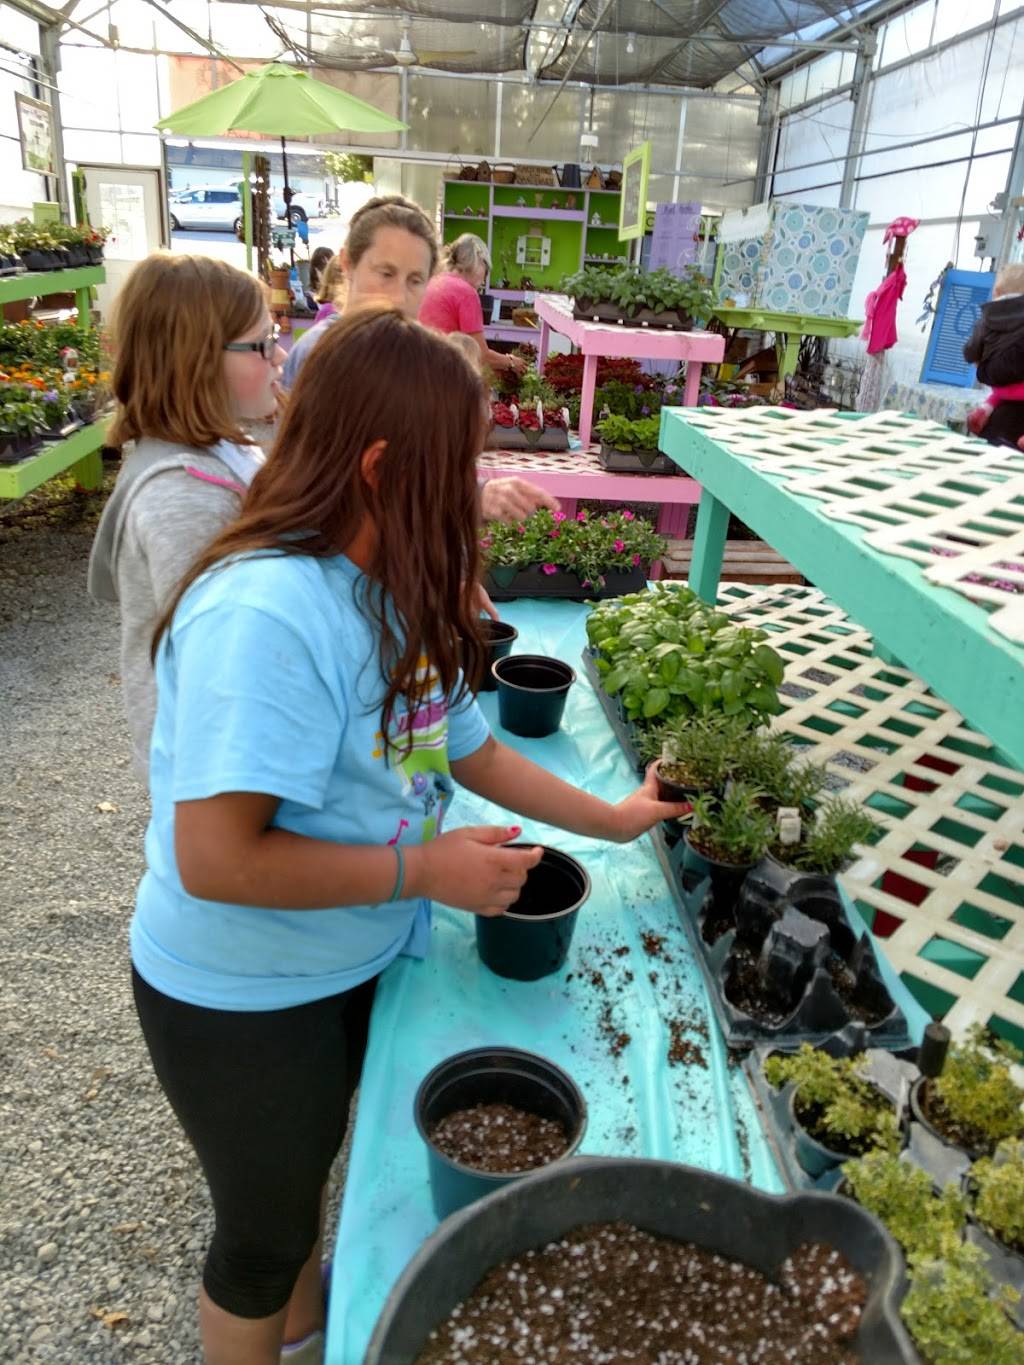 Adopt-A-Plant Greenhouses | 10856 Oxford Rd, Harrison, OH 45030, USA | Phone: (513) 738-0040